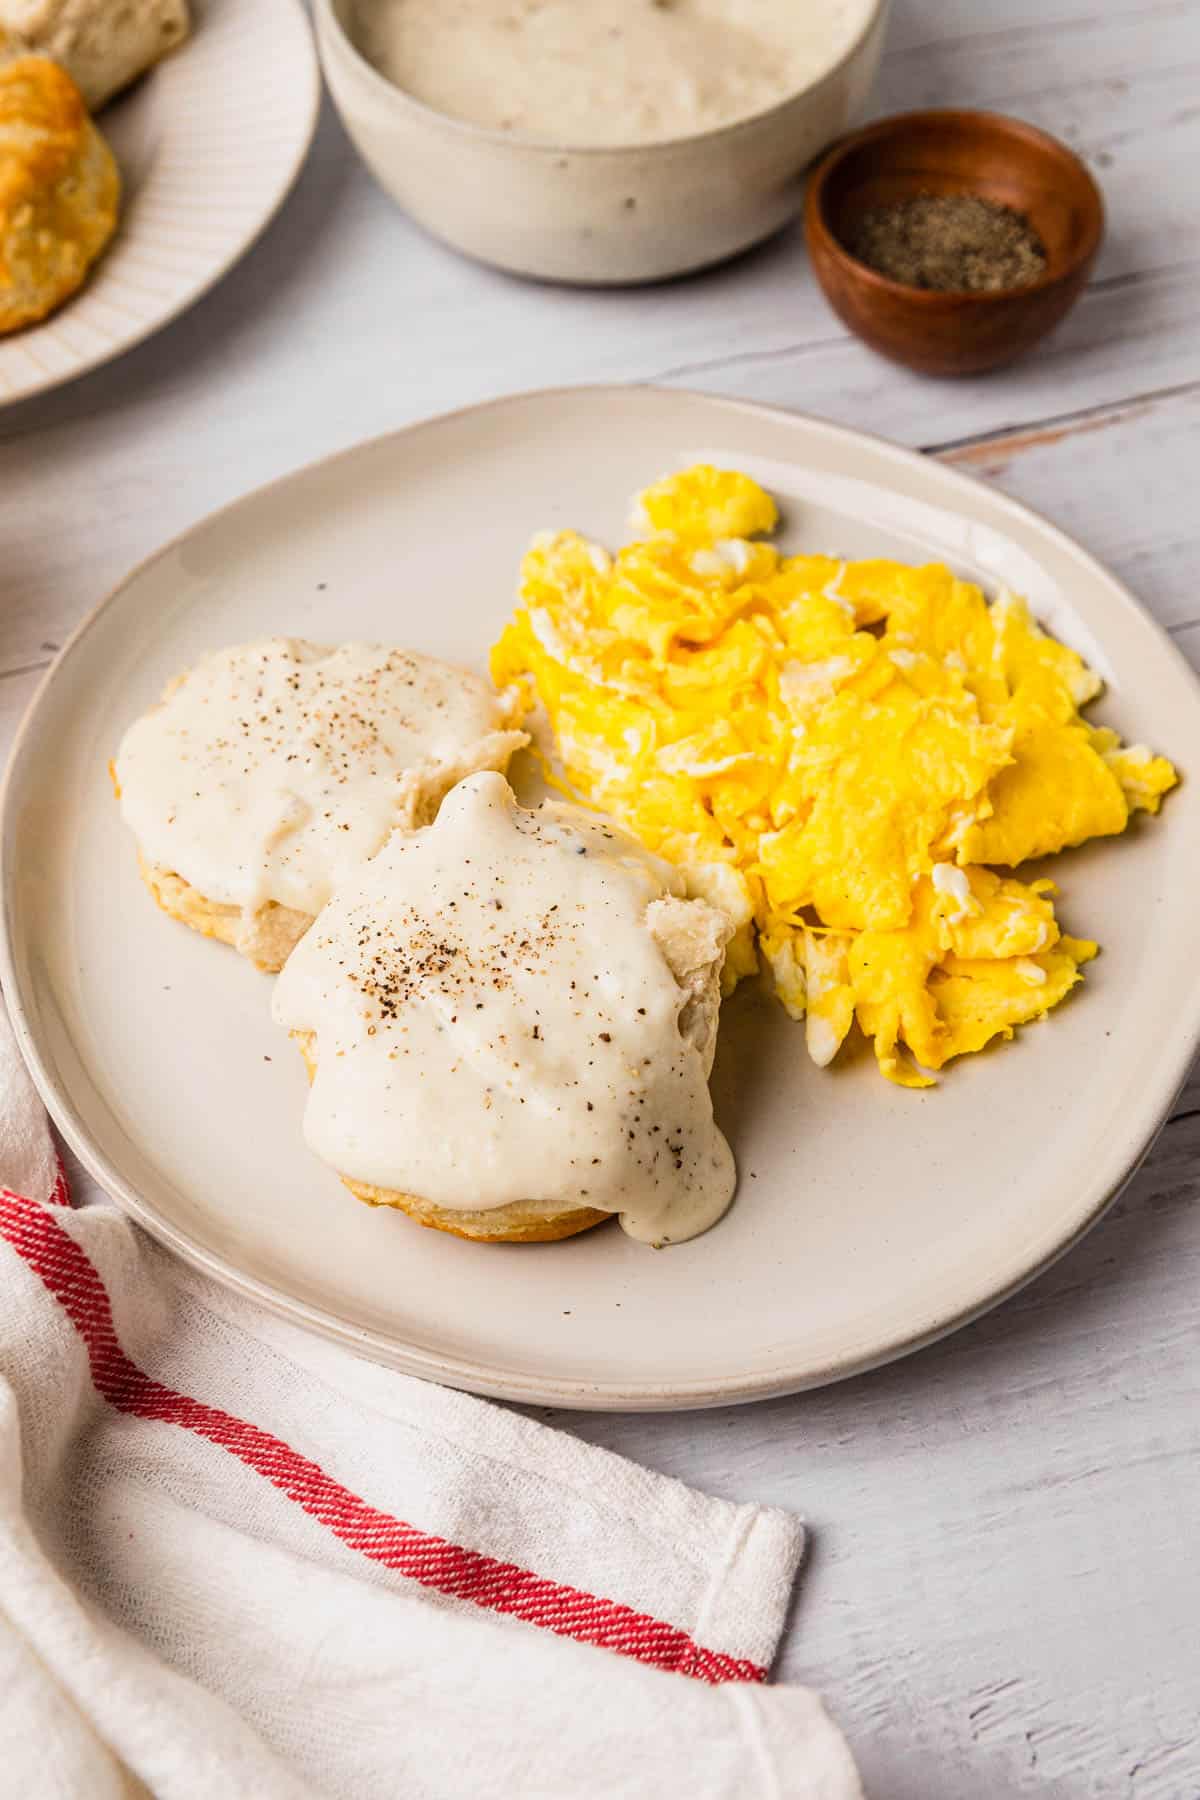 a plate with a breakfast meal of biscuits, gravy, and scrambled eggs